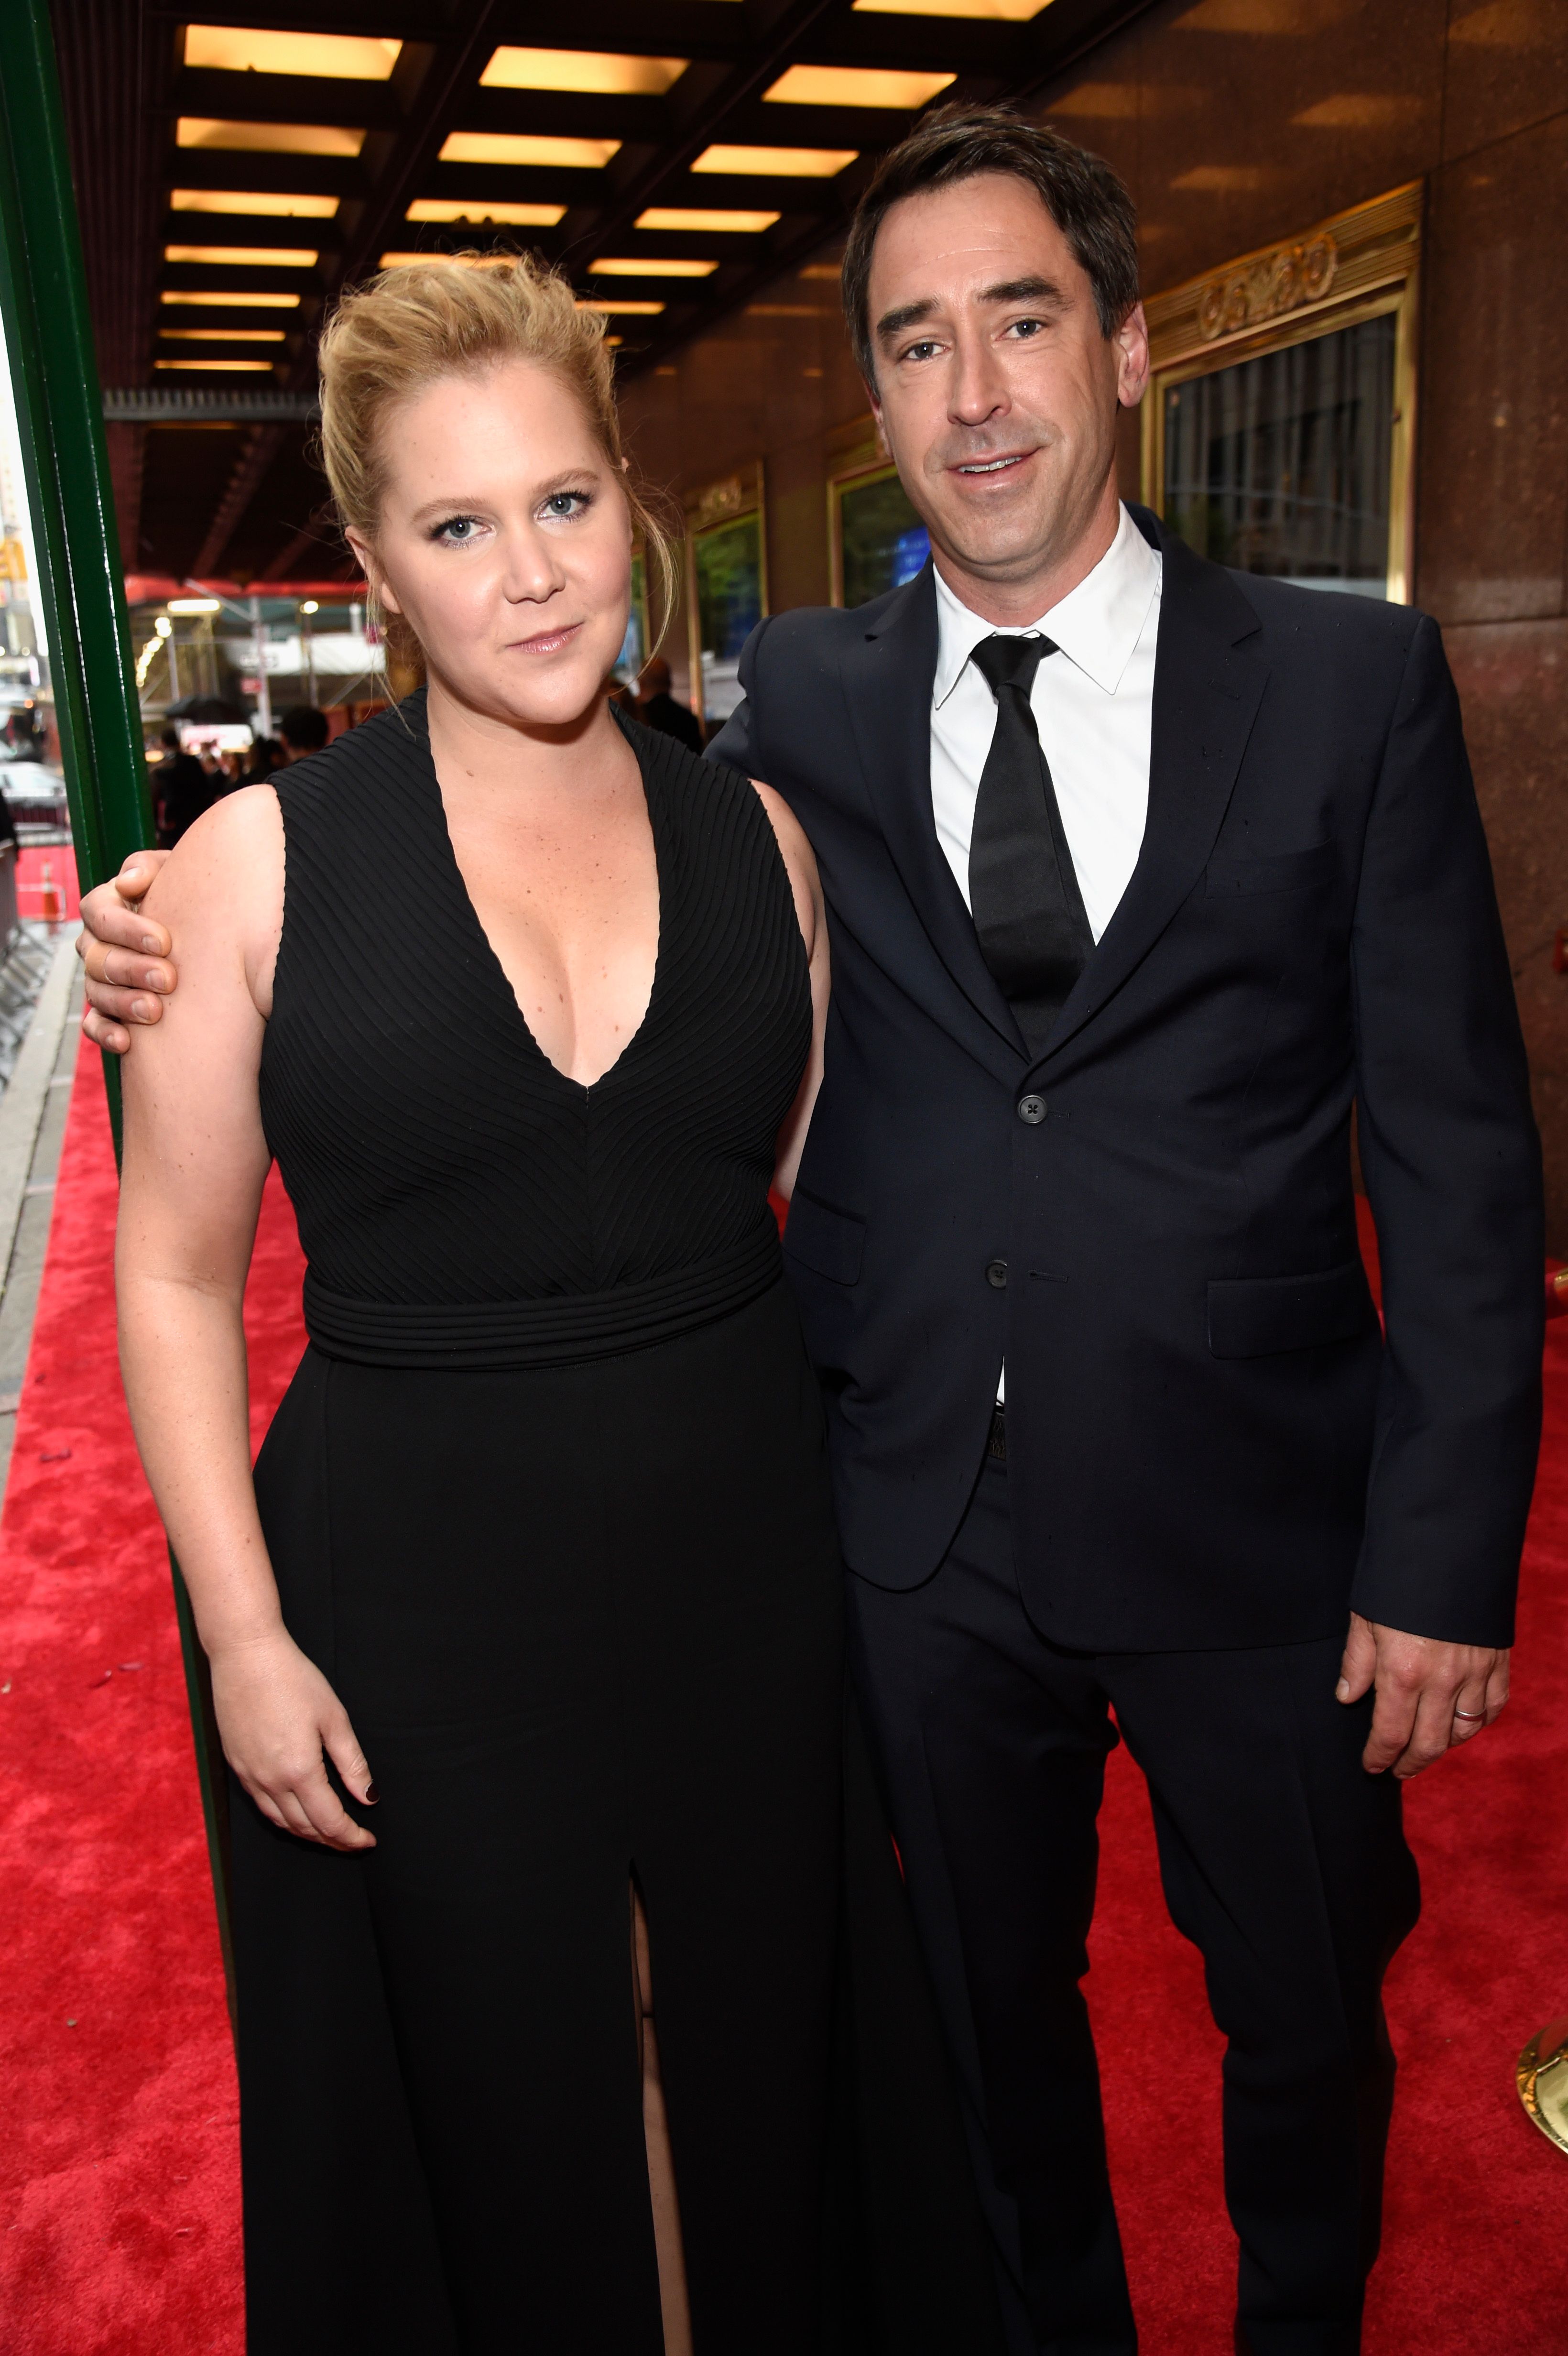 Amy Schumer and Chris Fischer at the 72nd Annual Tony Awards in 2018, in New York City | Source: Getty Images